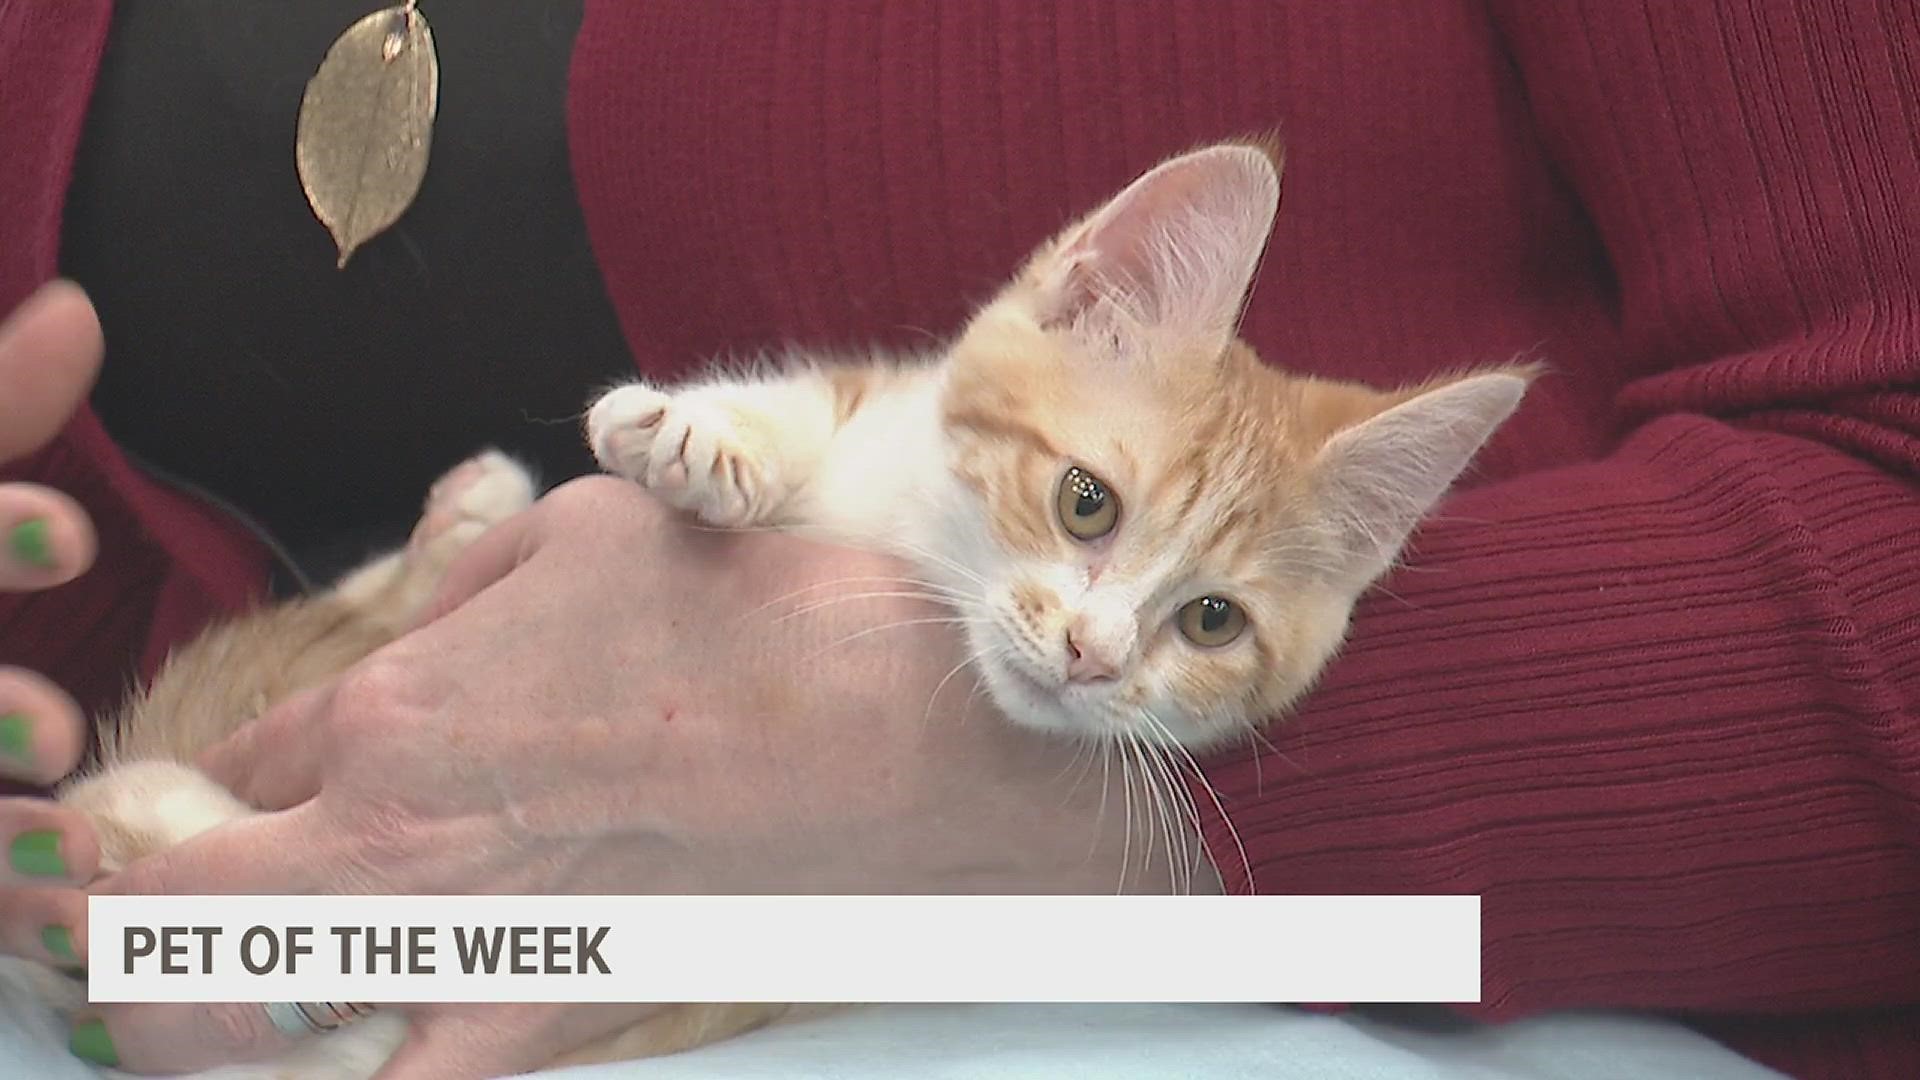 Diana the kitten is just 3 months old and is probably the cutest thing you'll see all week! All of her siblings have been adopted, so she's ready for a family.